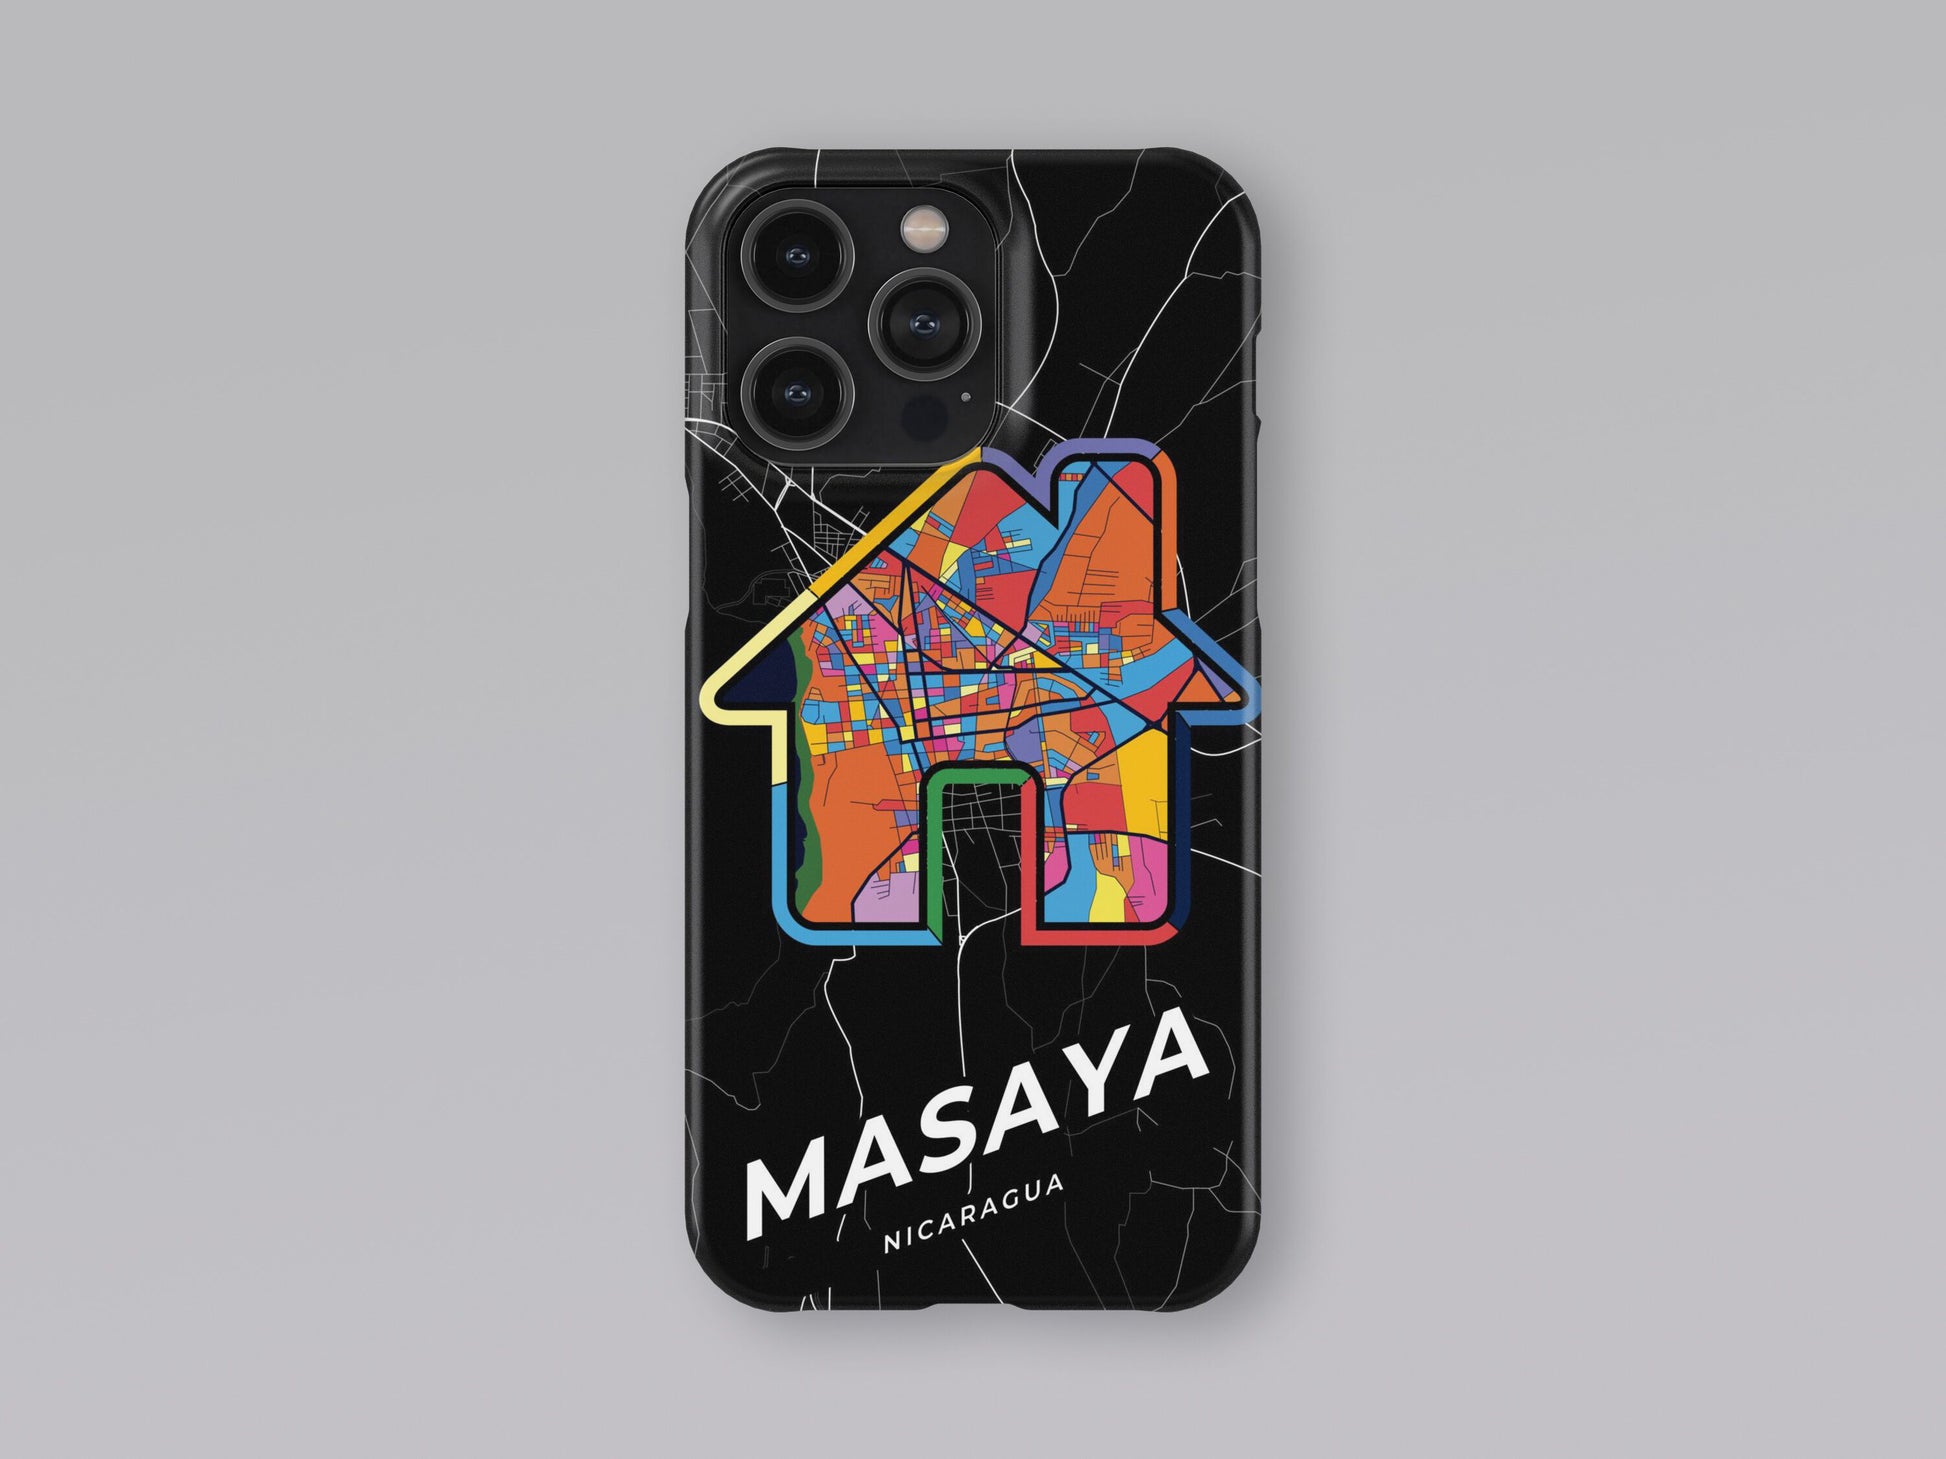 Masaya Nicaragua slim phone case with colorful icon. Birthday, wedding or housewarming gift. Couple match cases. 3